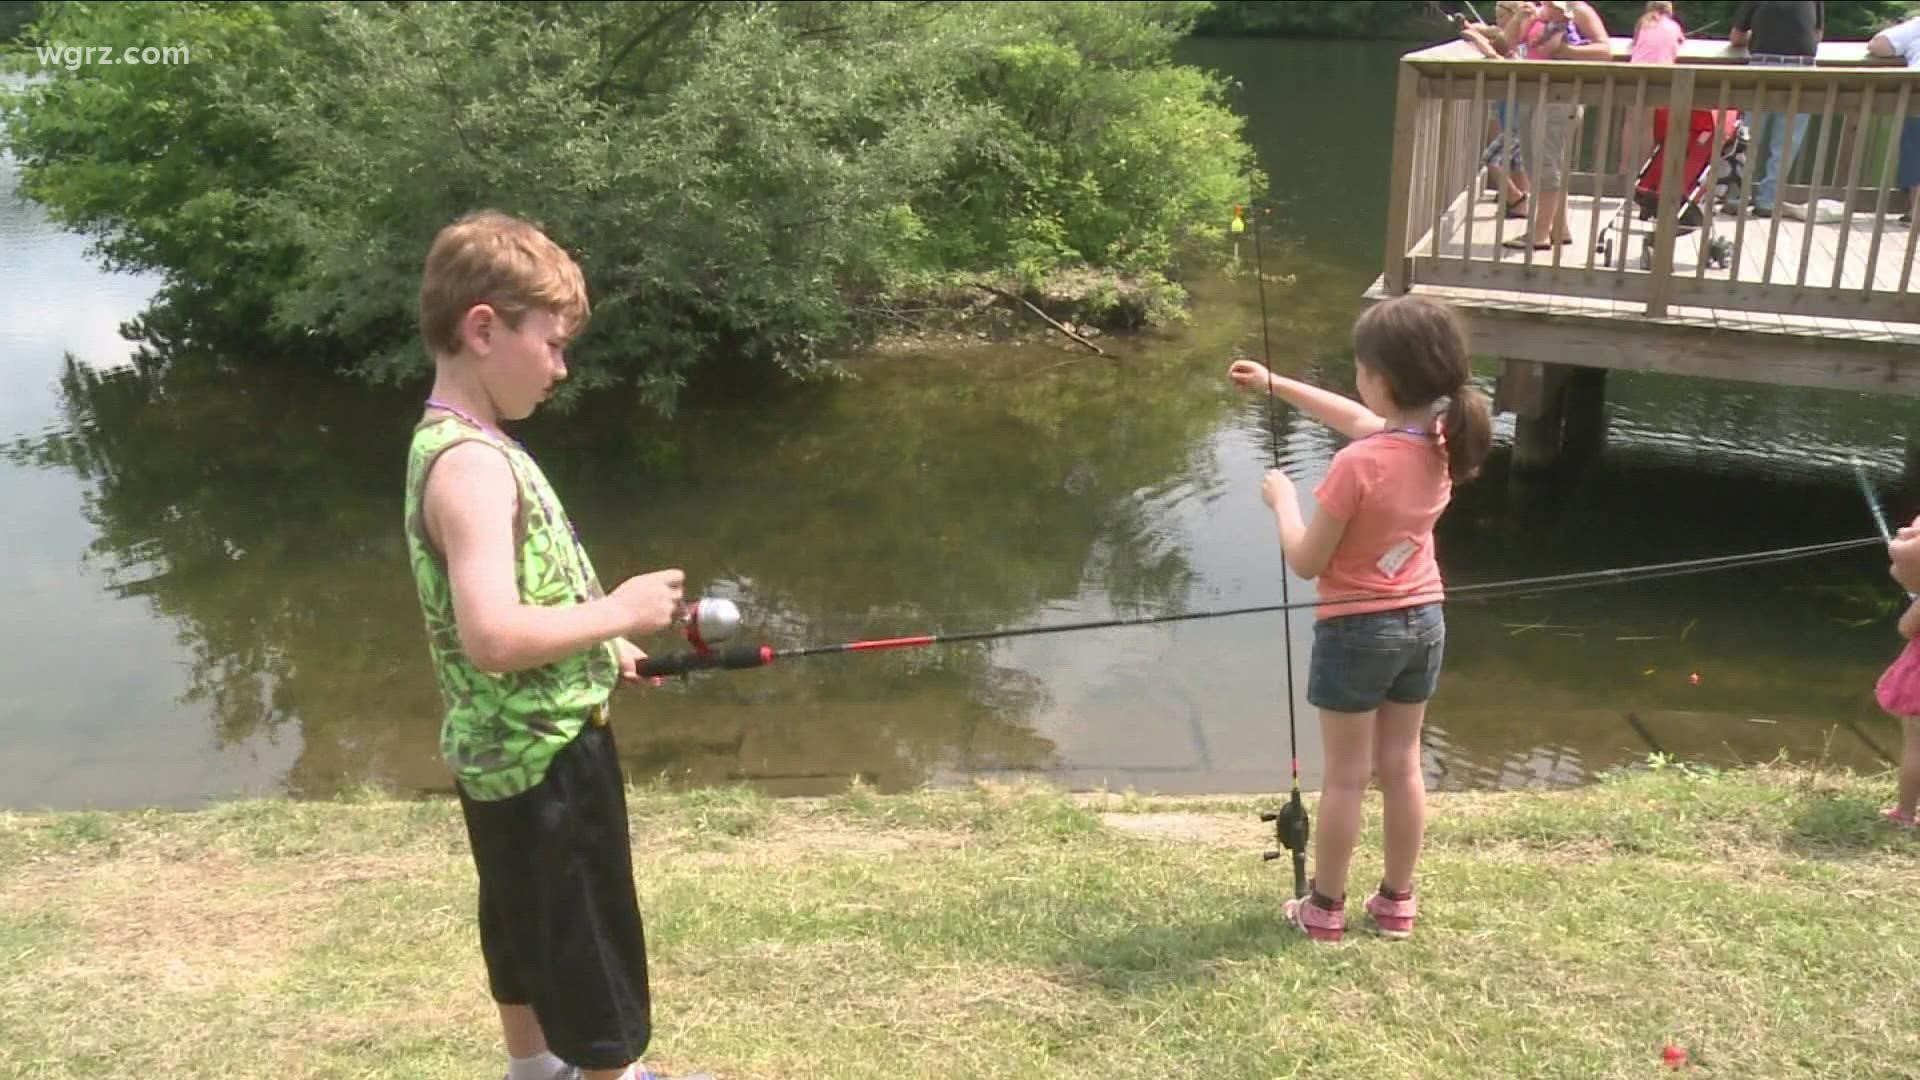 This weekend you can fish without a license.
It's all a part of free fishing days in New York State.